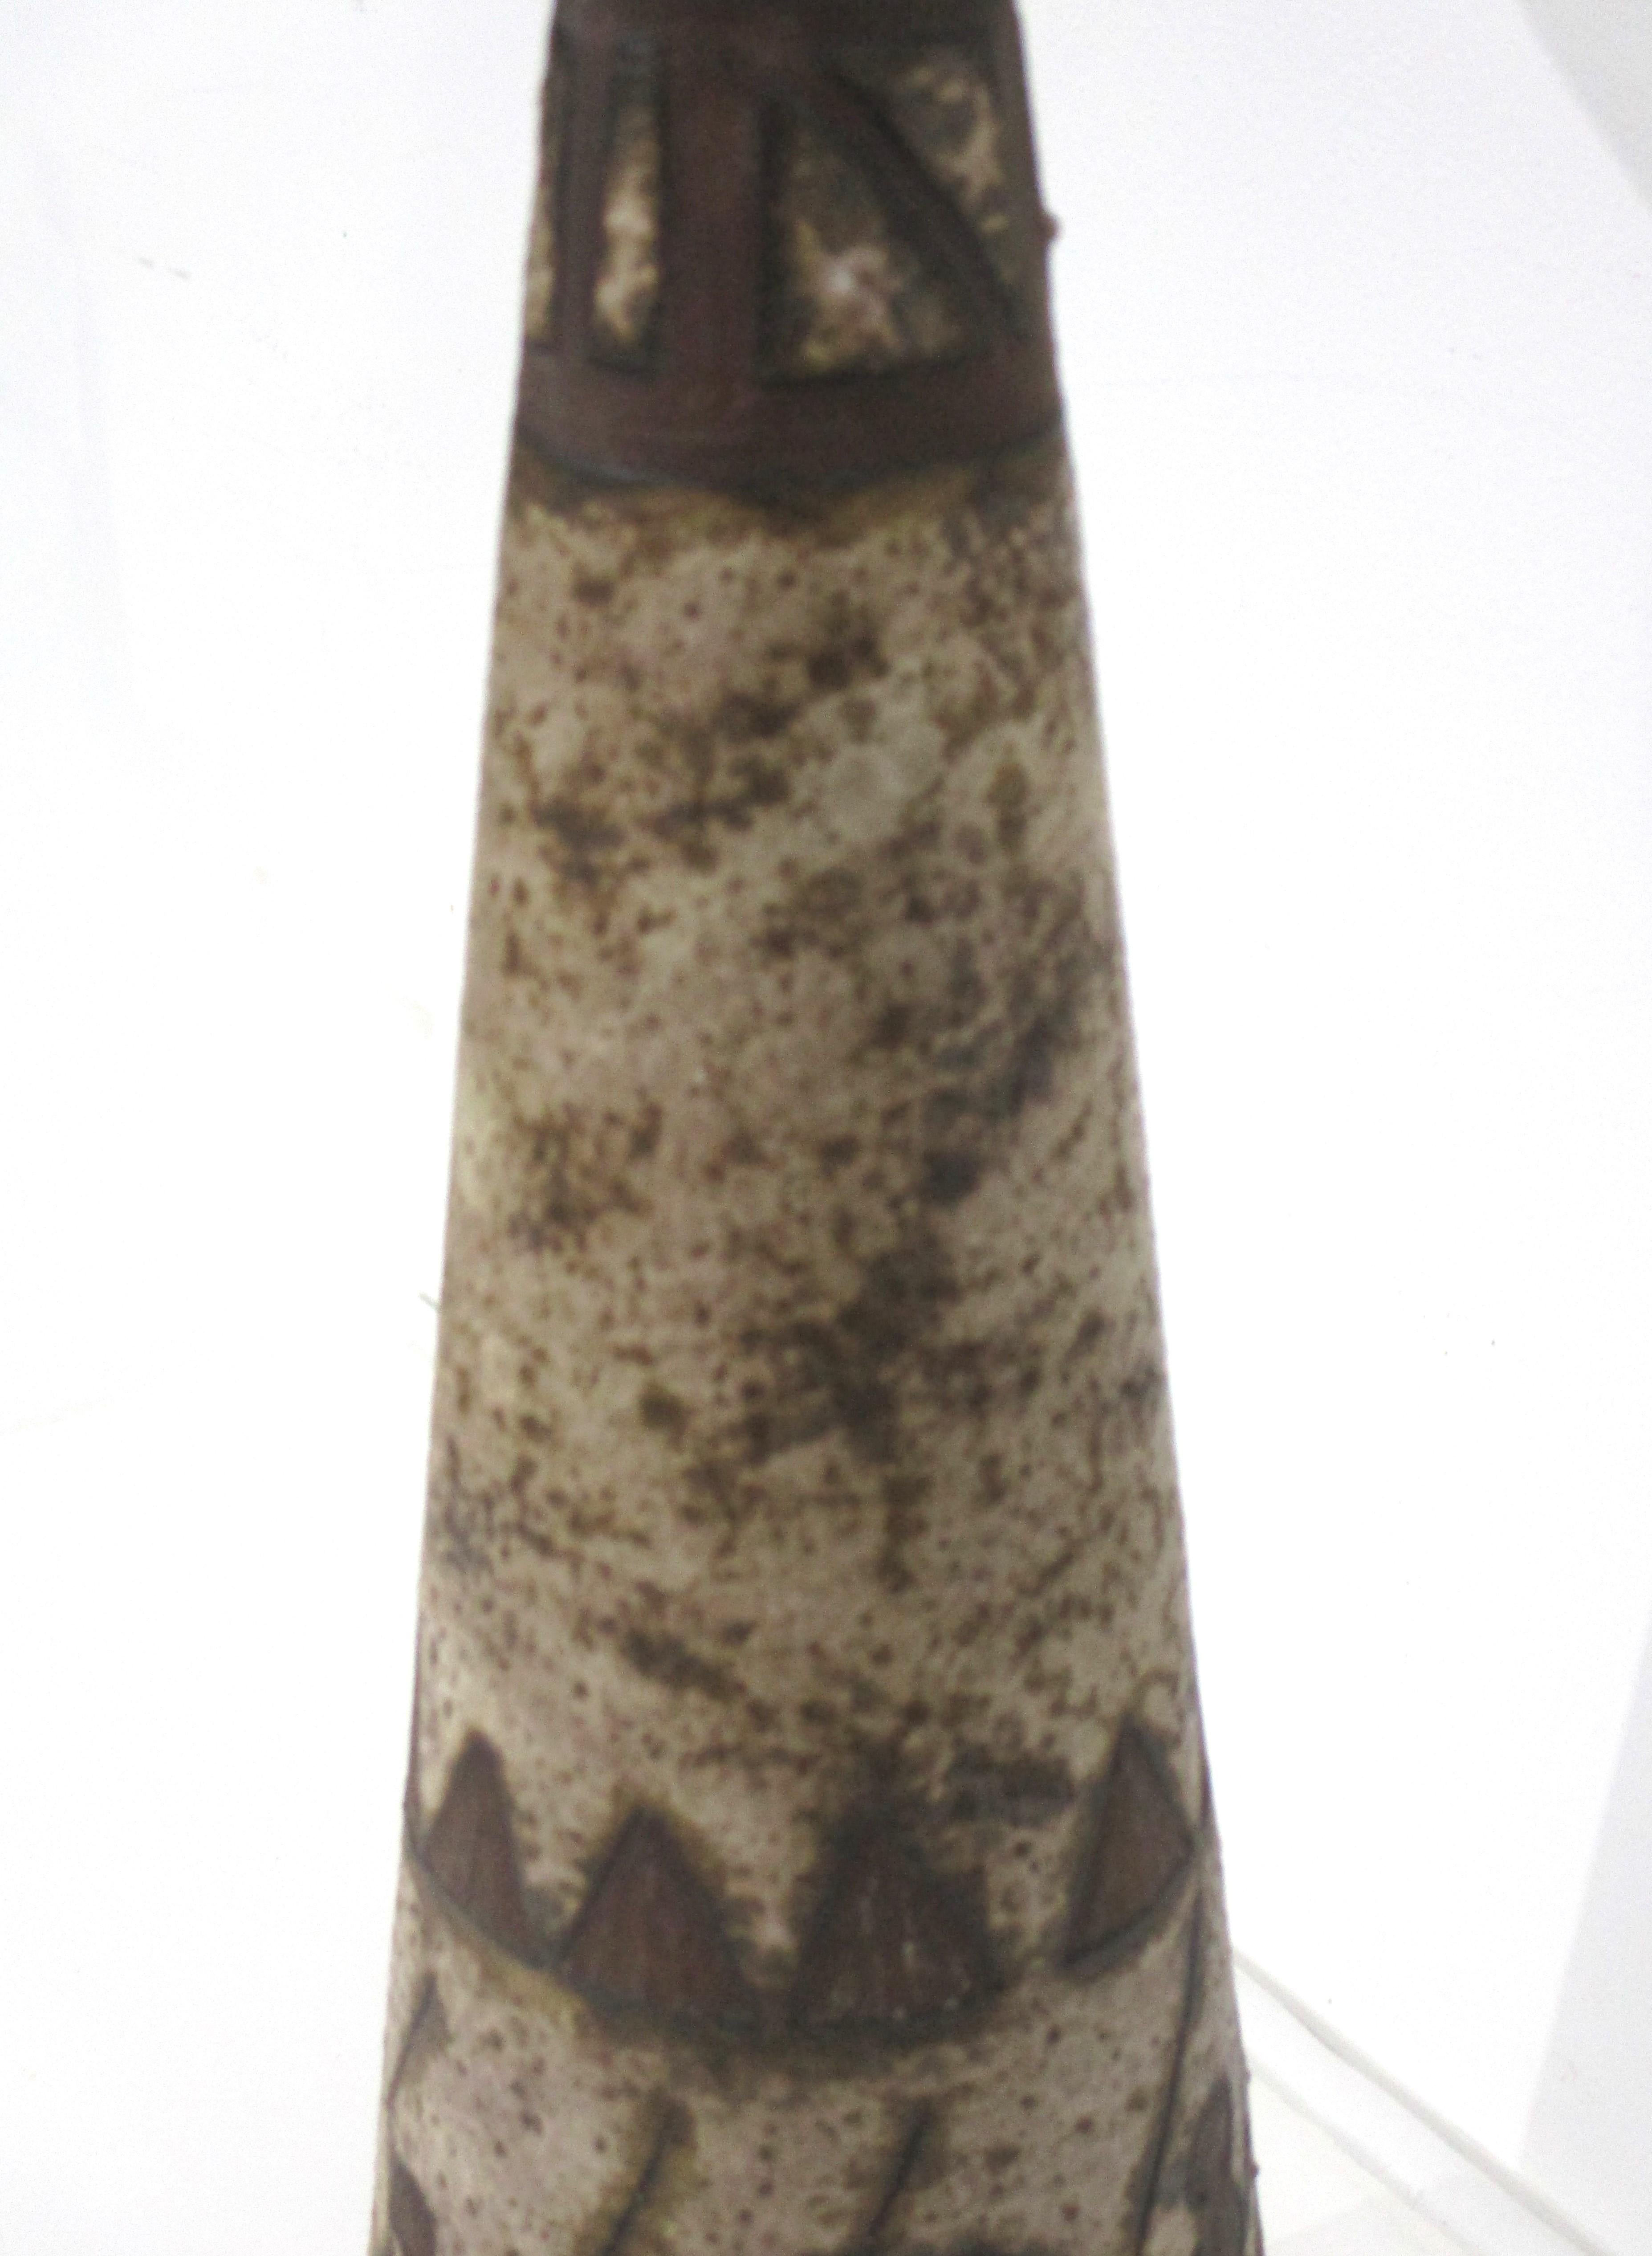 Large Ceramano Tribal Motif Pottery Candlestick by Hans Welling  In Good Condition For Sale In Cincinnati, OH